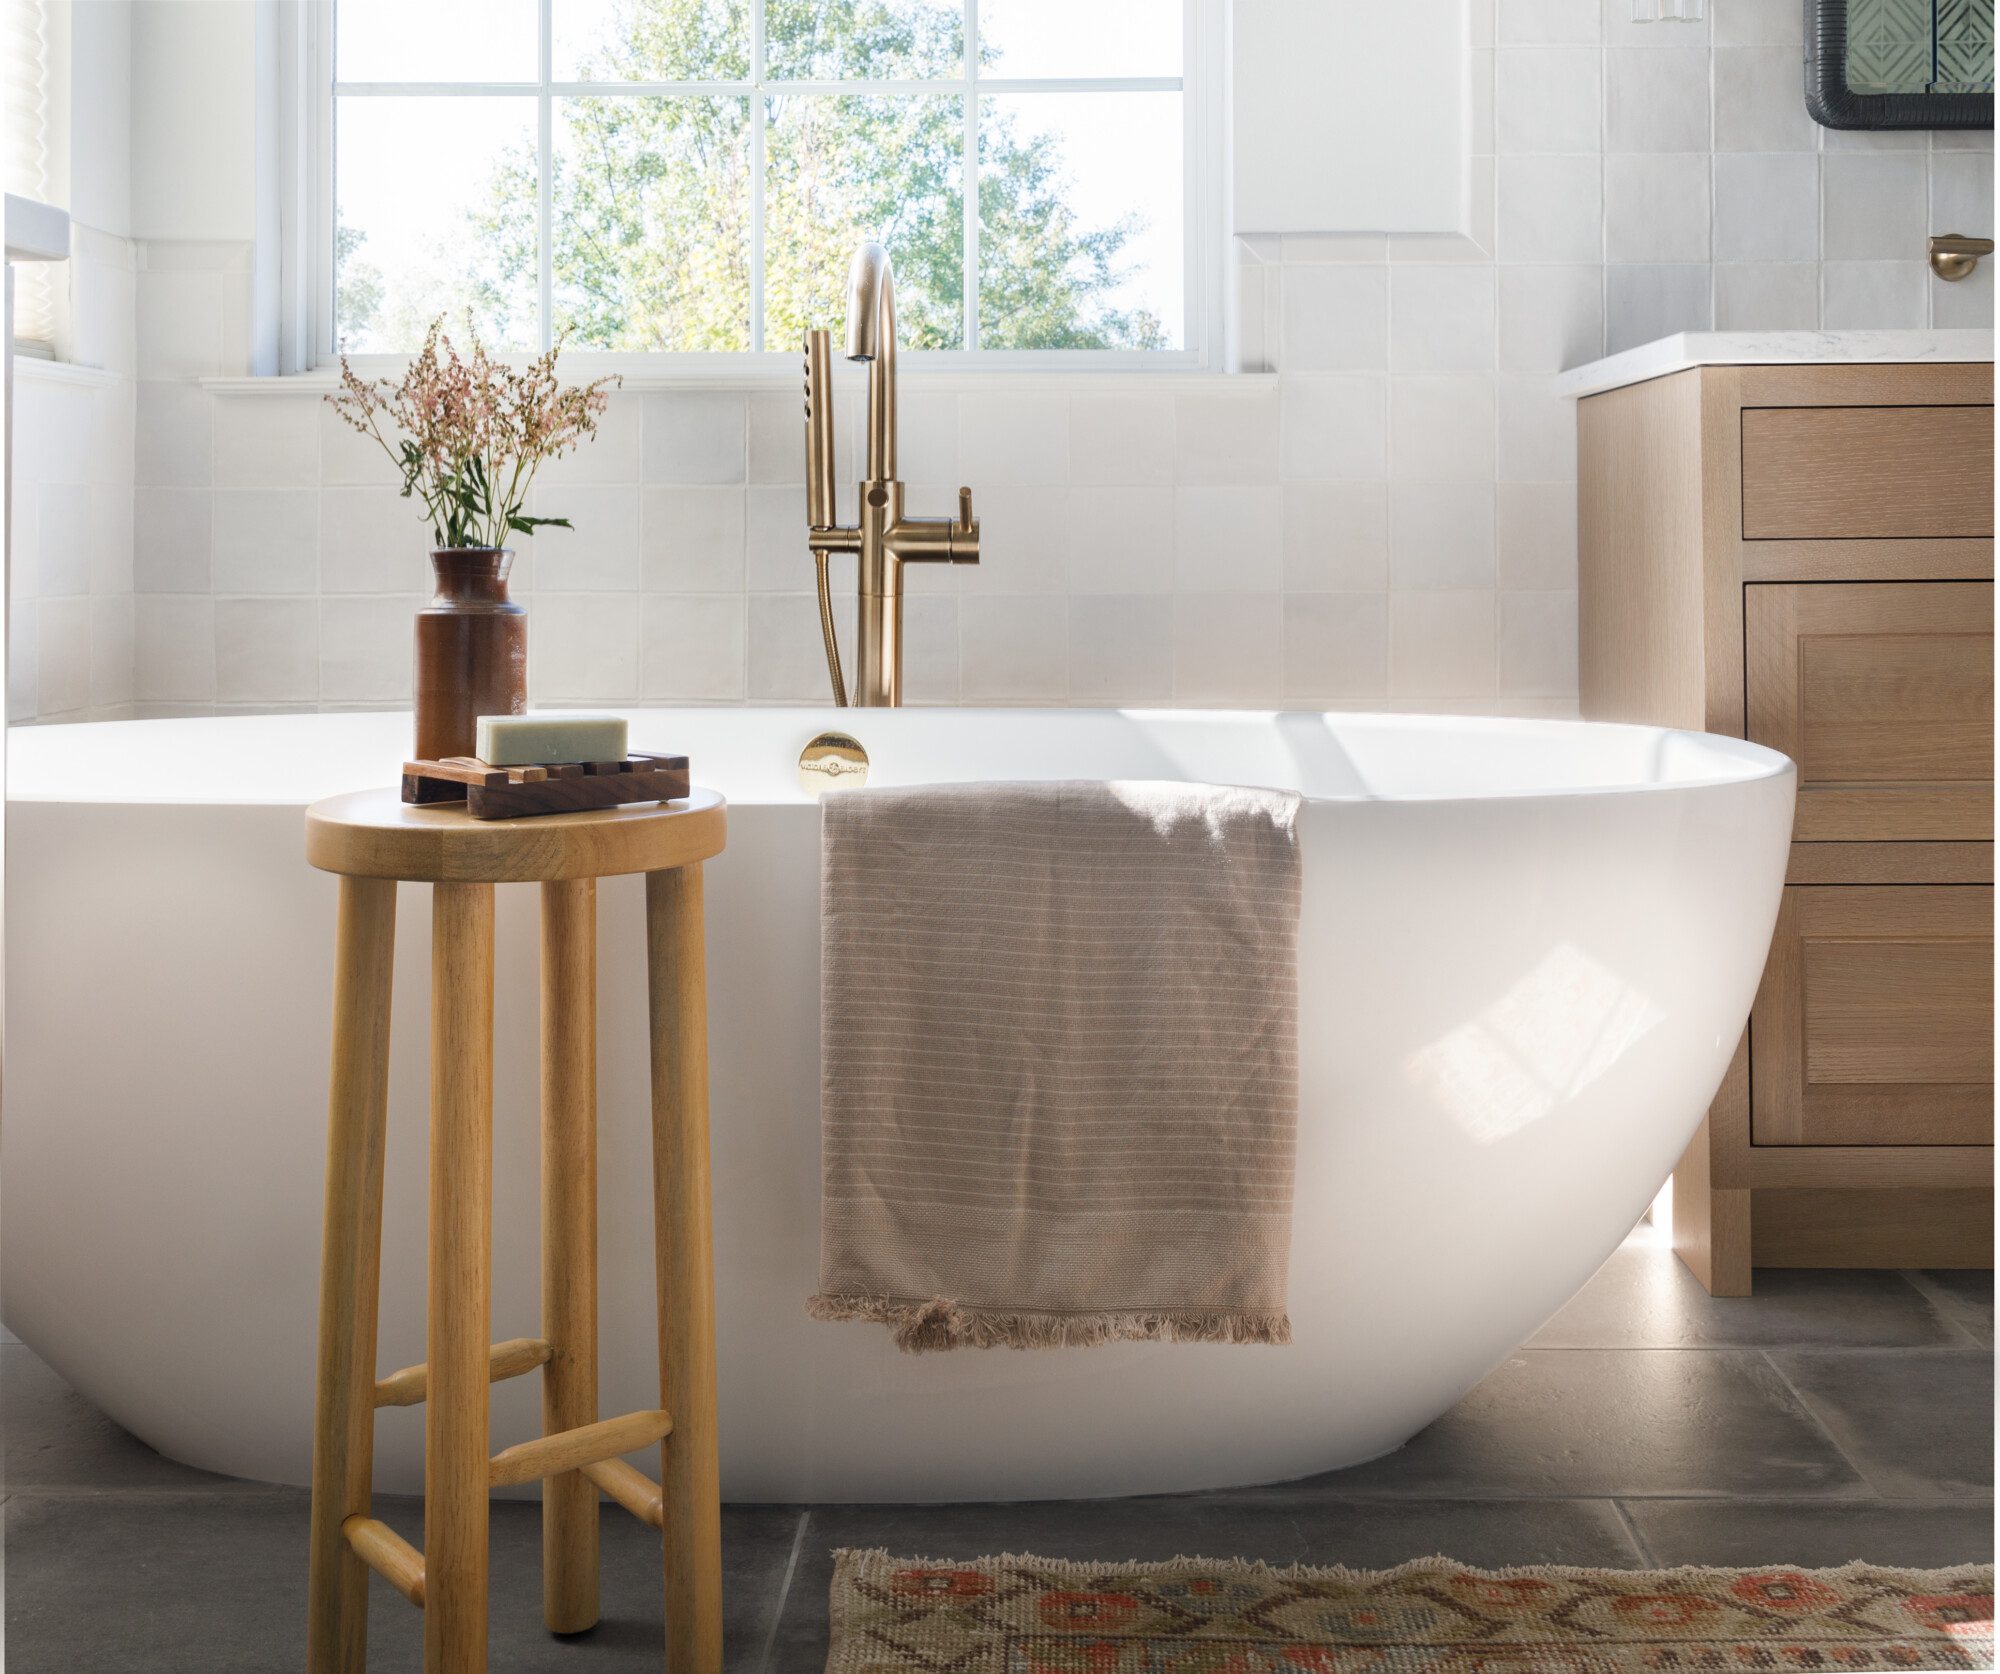 beautiful tub in front of a window with plenty of natural light